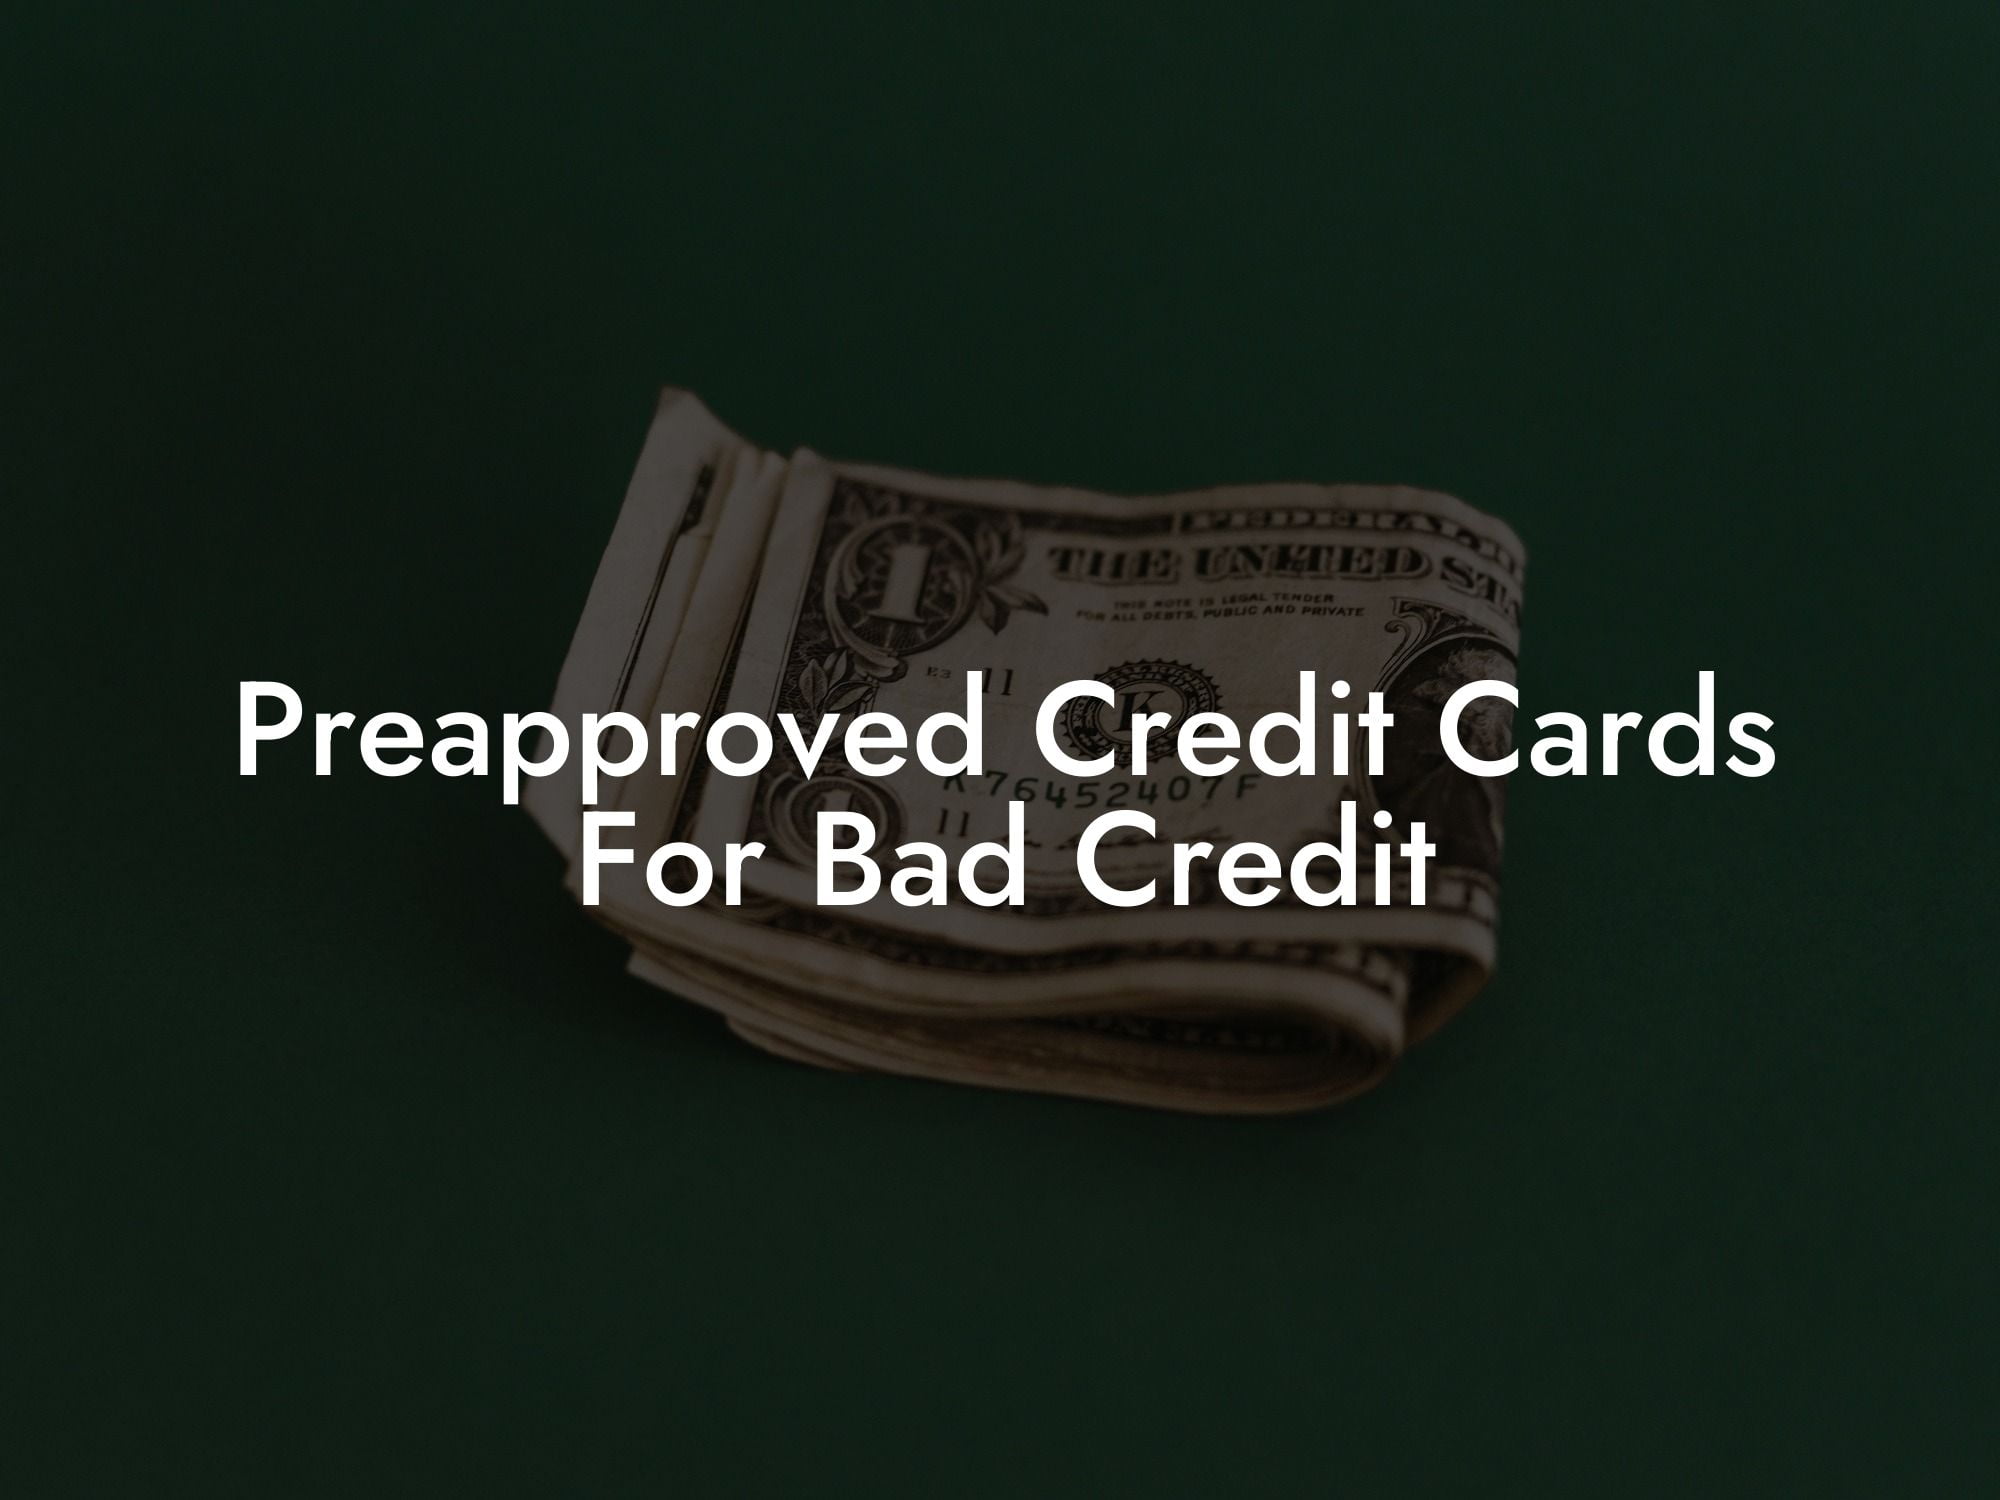 Preapproved Credit Cards For Bad Credit